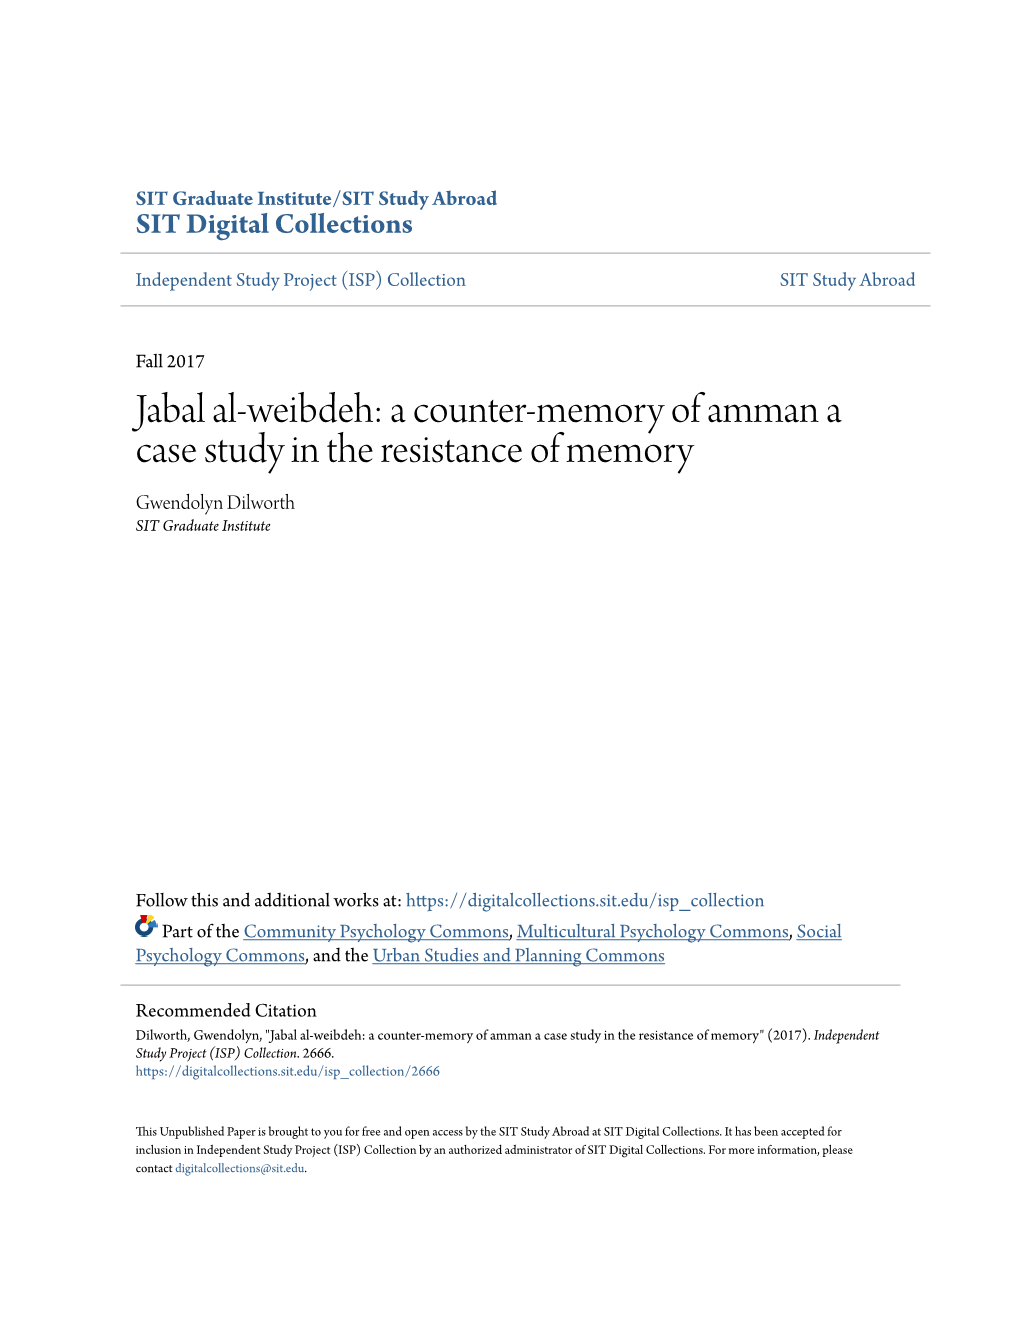 Jabal Al-Weibdeh: a Counter-Memory of Amman a Case Study in the Resistance of Memory Gwendolyn Dilworth SIT Graduate Institute